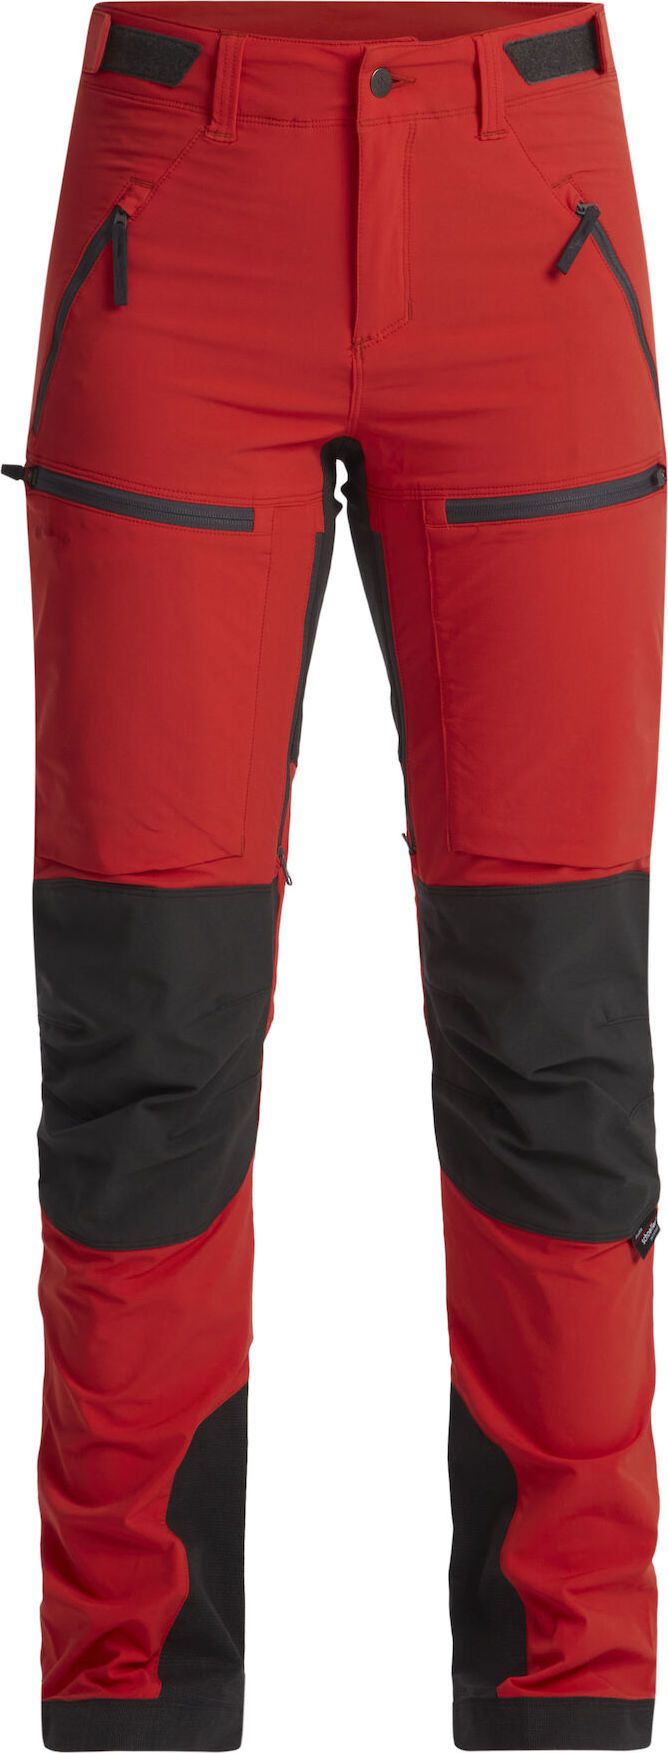 Women's Askro Pro Pant Lively Red/Charcoal